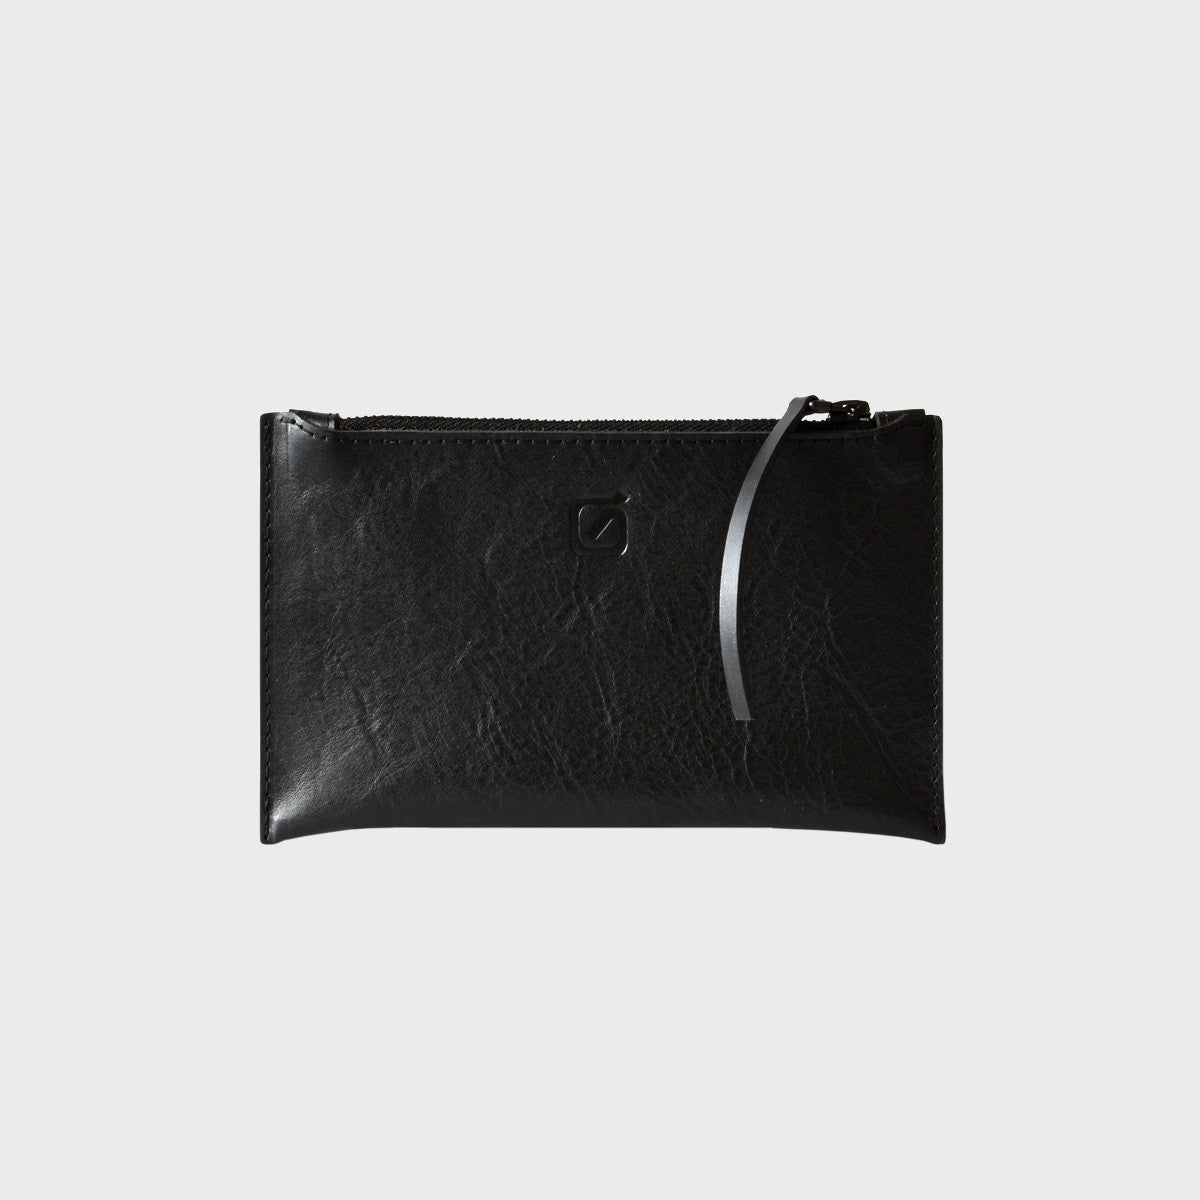 H+B CLUTCH | BLACK LEATHER CLUTCH PURSE | Hand+Built Leather Goods